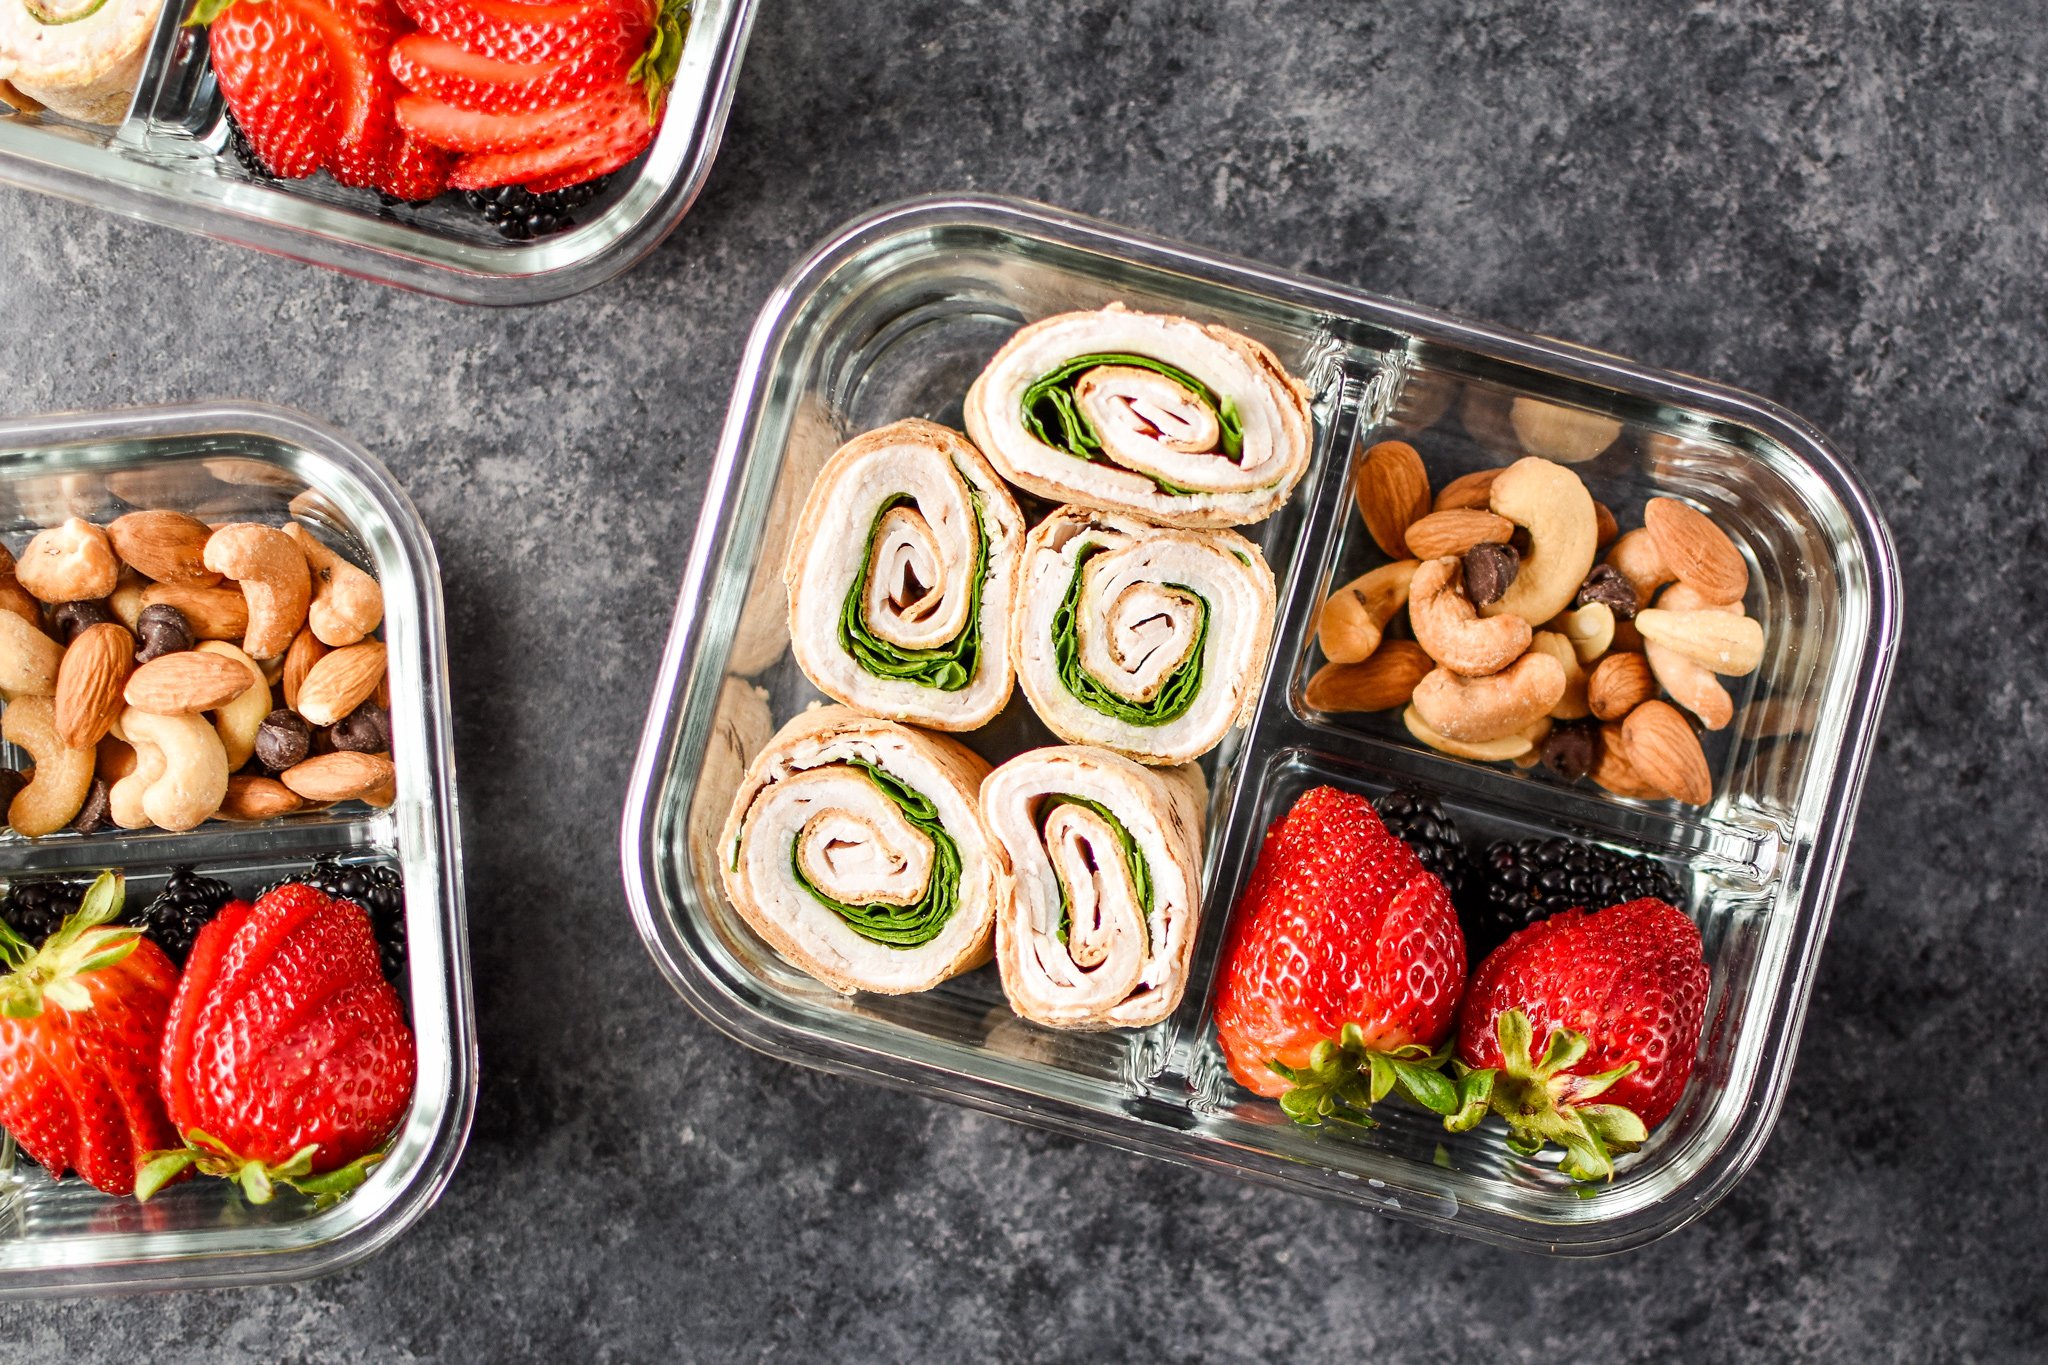 A view of the Easy Turkey Pinwheel Meal Prep from above with berries and nuts.